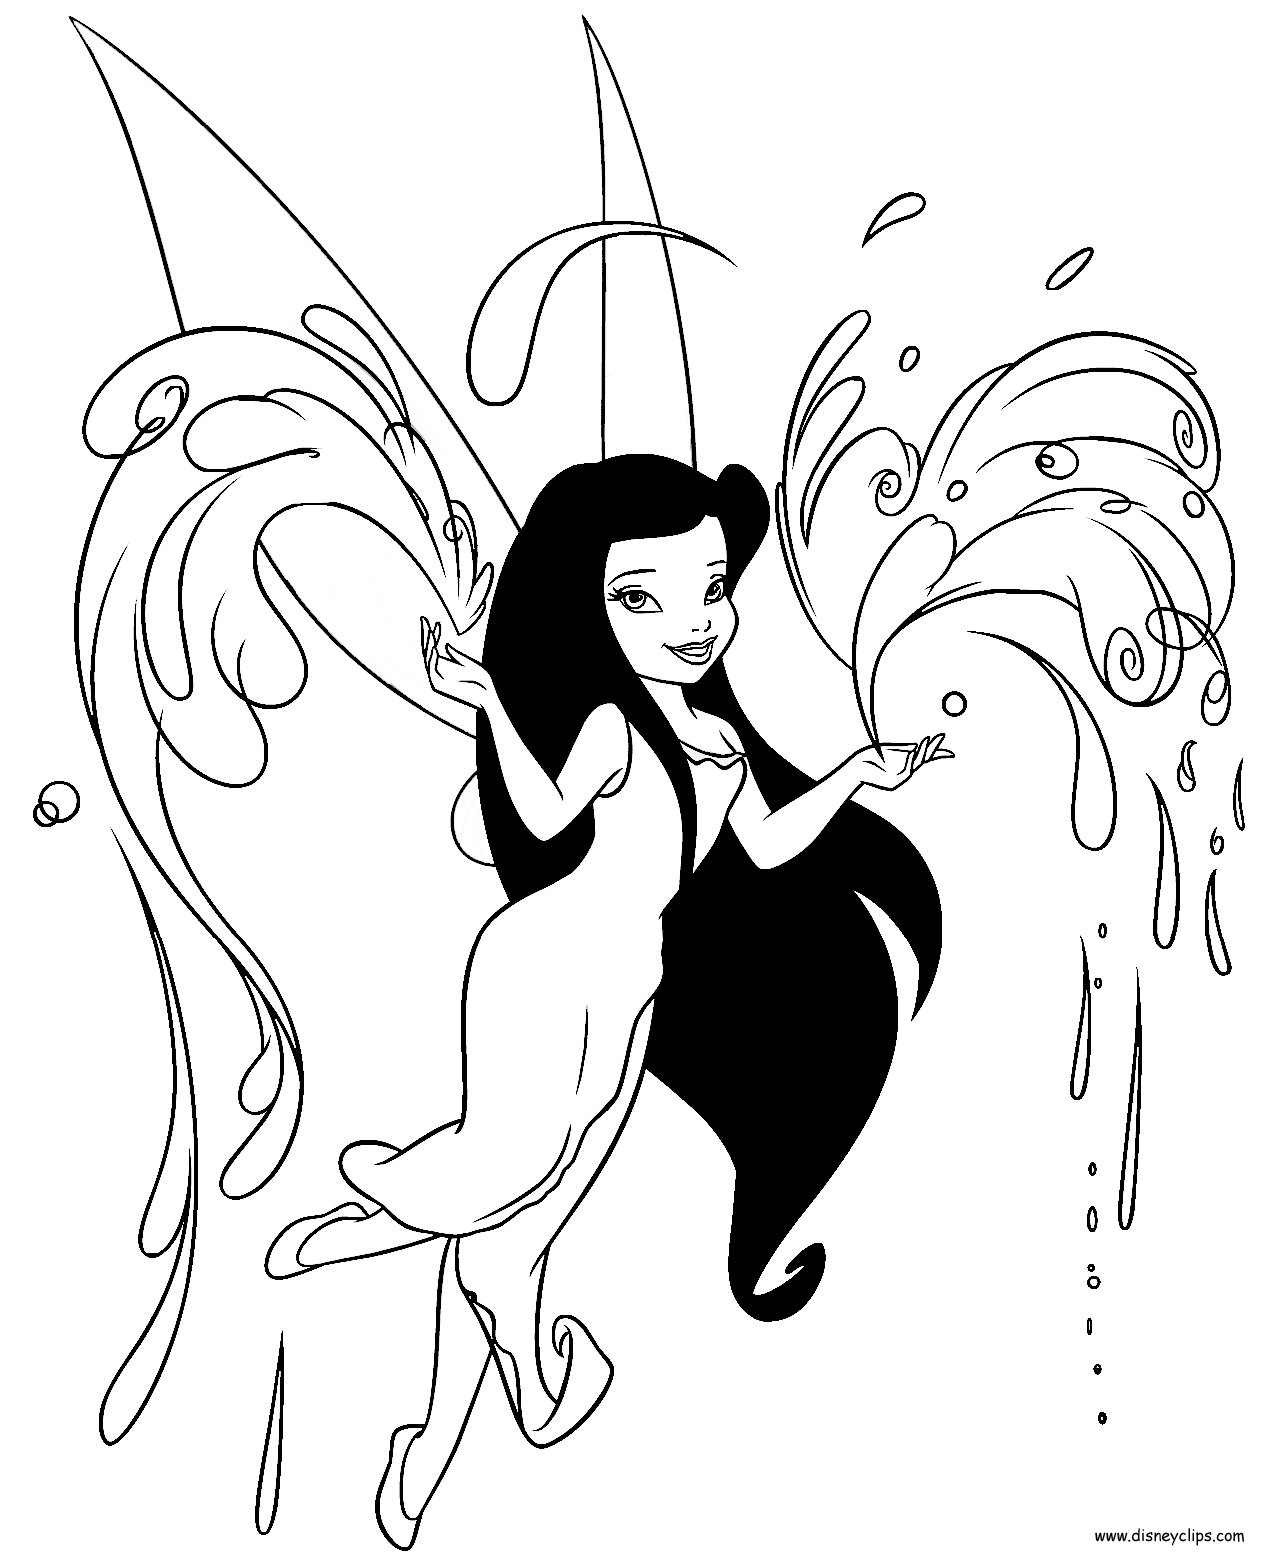 Printable Coloring Pages Of Fairies - Printable World Holiday